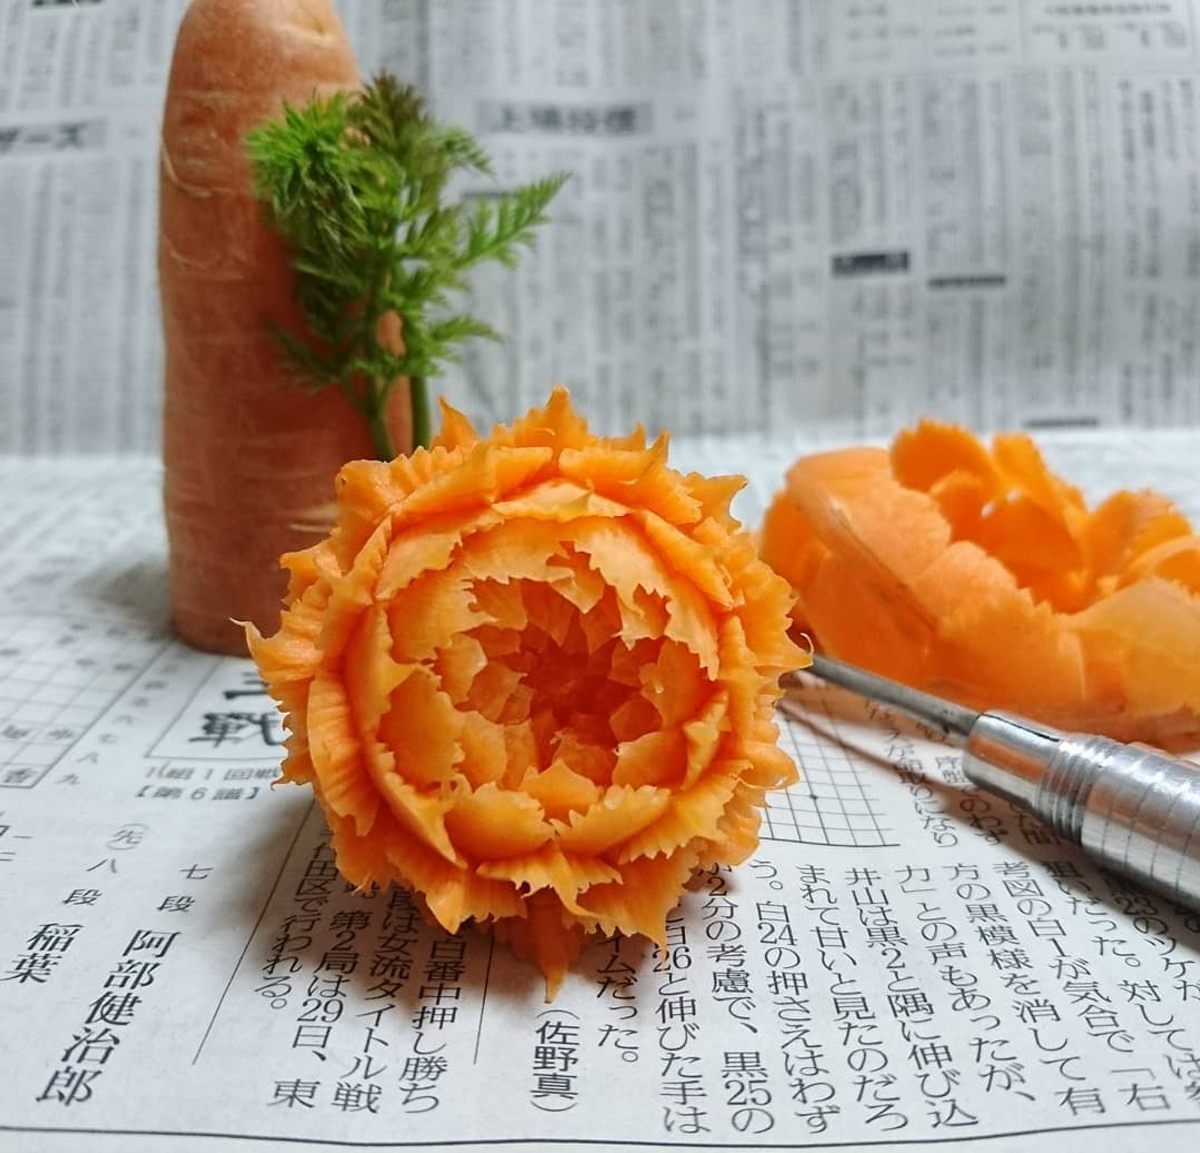 vegetable carving carrot